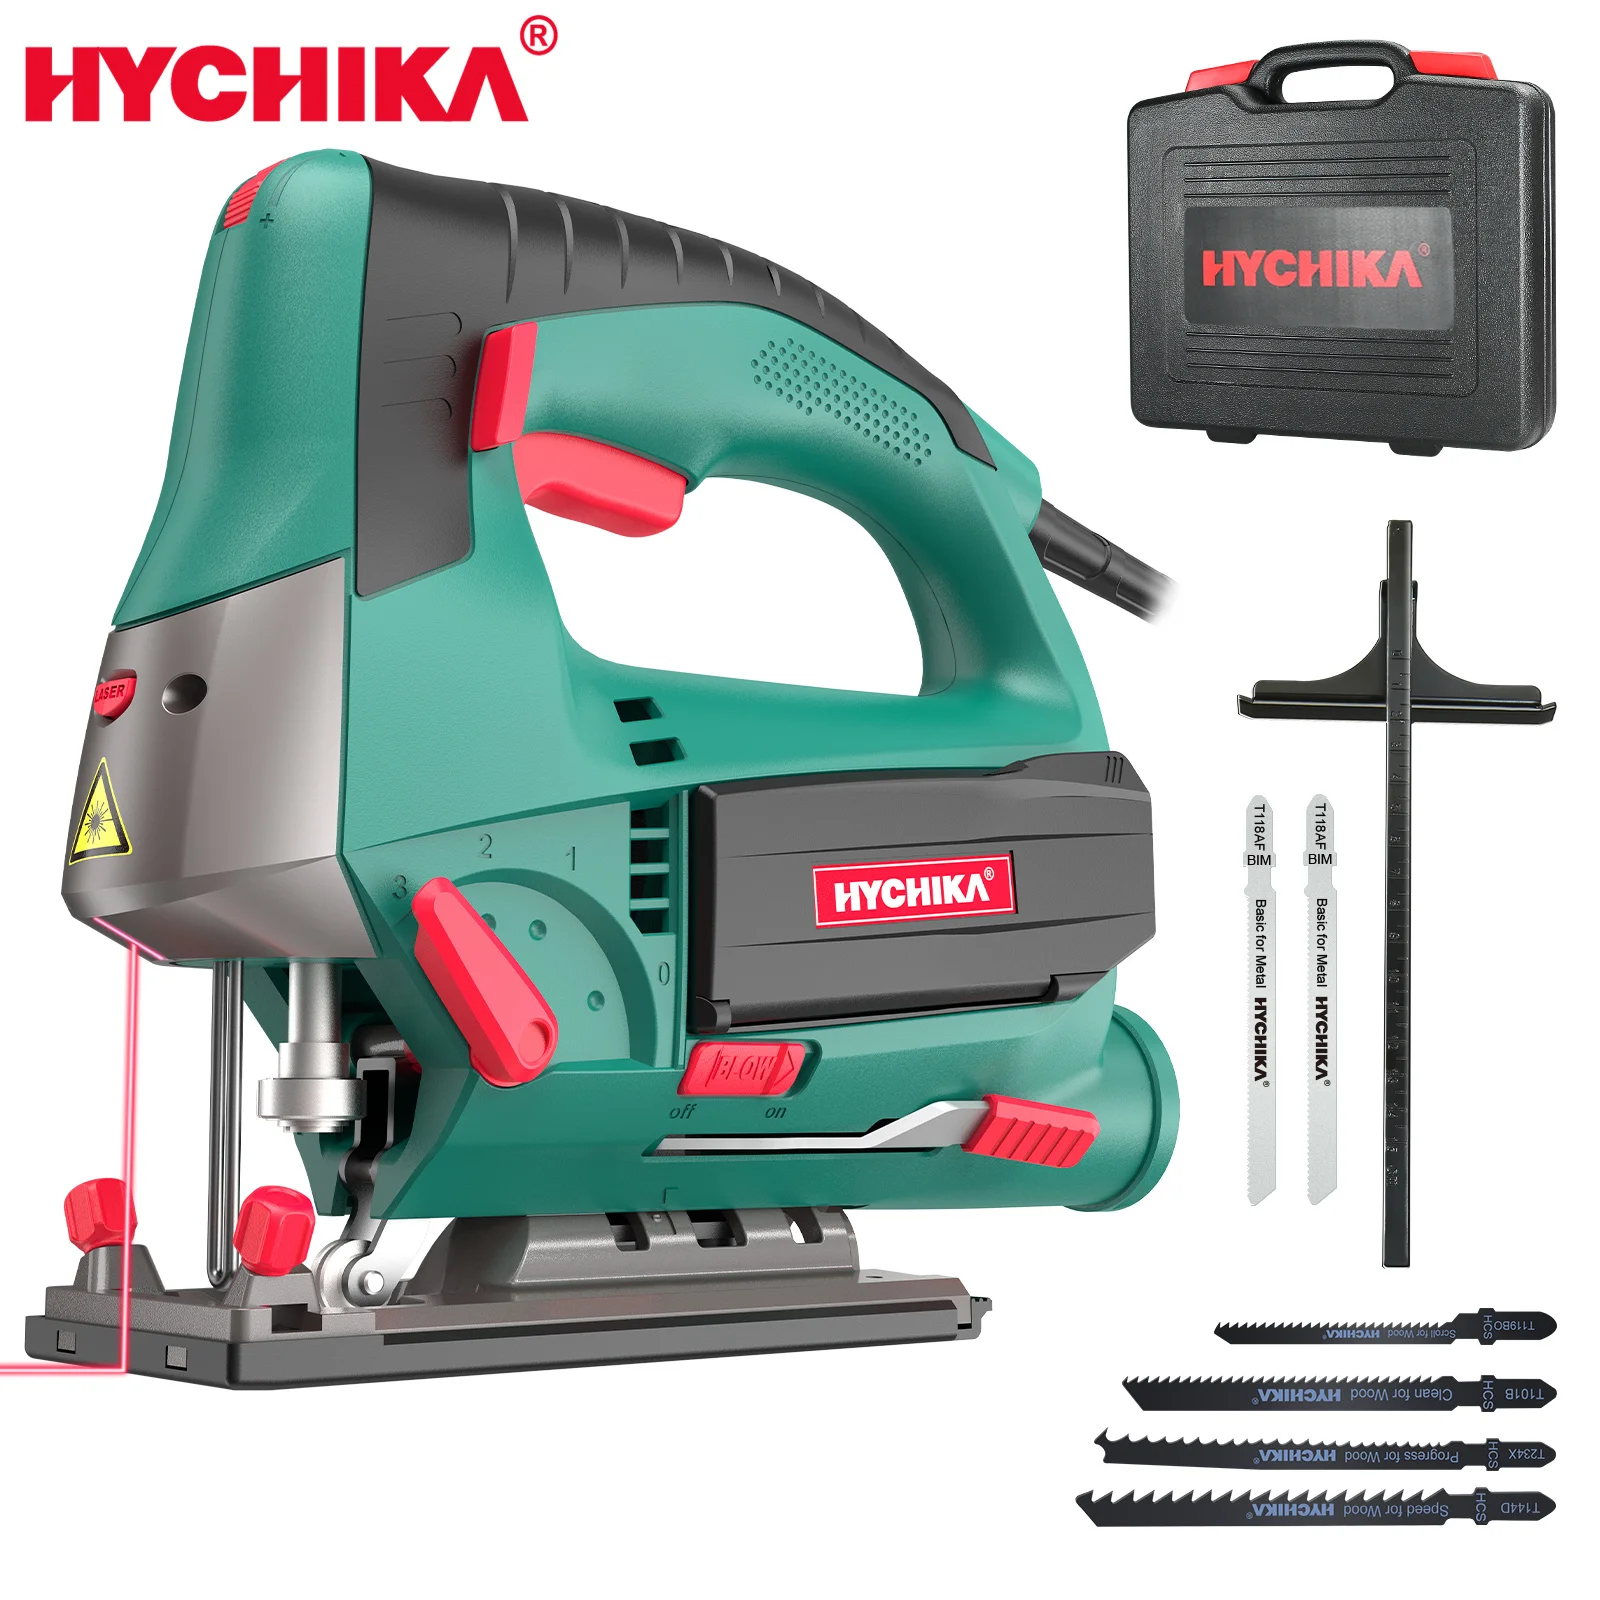 HYCHIKA 800W Laser Jig Saw 6 Variable Speed Multifunctional Jigsaw Electric Saw for Woodworking Power Tool with 6 Pieces Blades